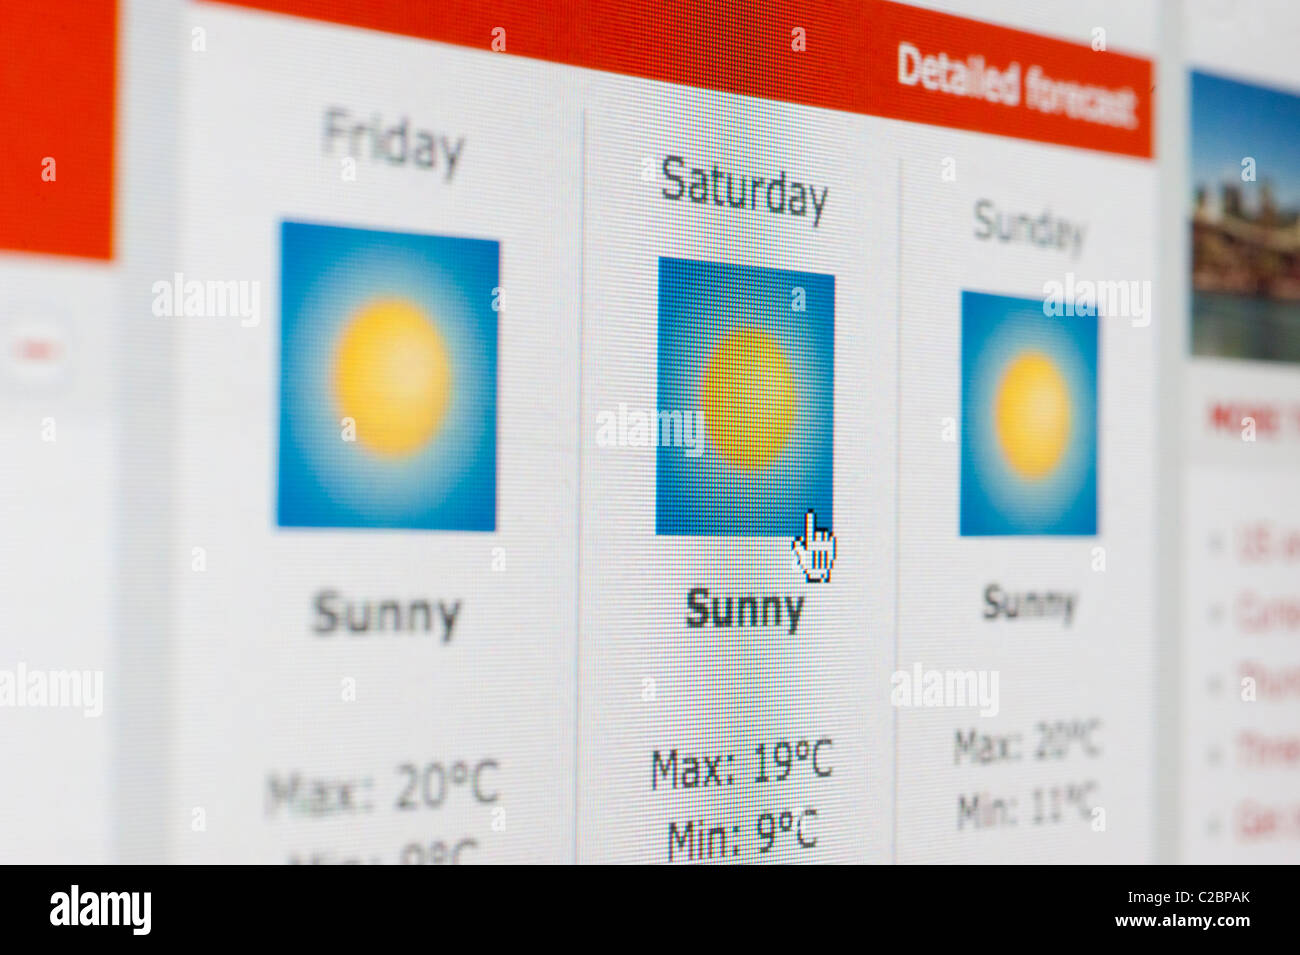 Weather forecast on the BBC website for a sunny weekend. Stock Photo